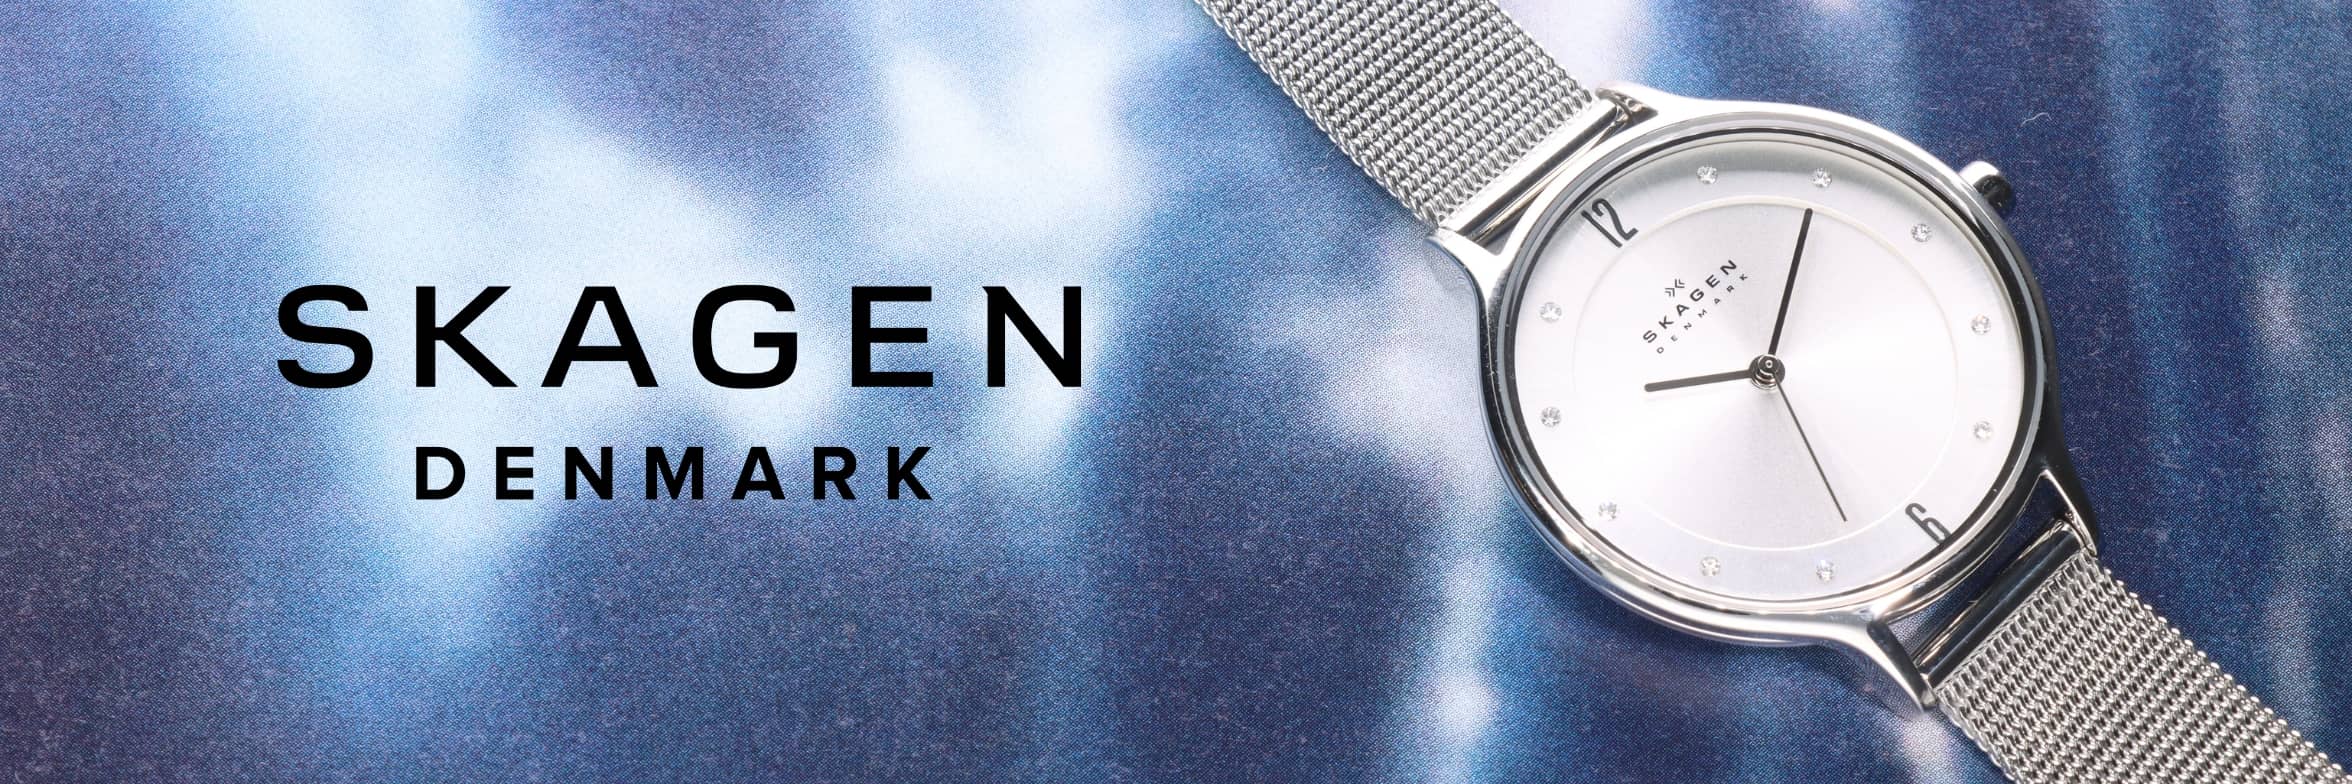 Buy Skagen watches online from official stockist - Free shipping